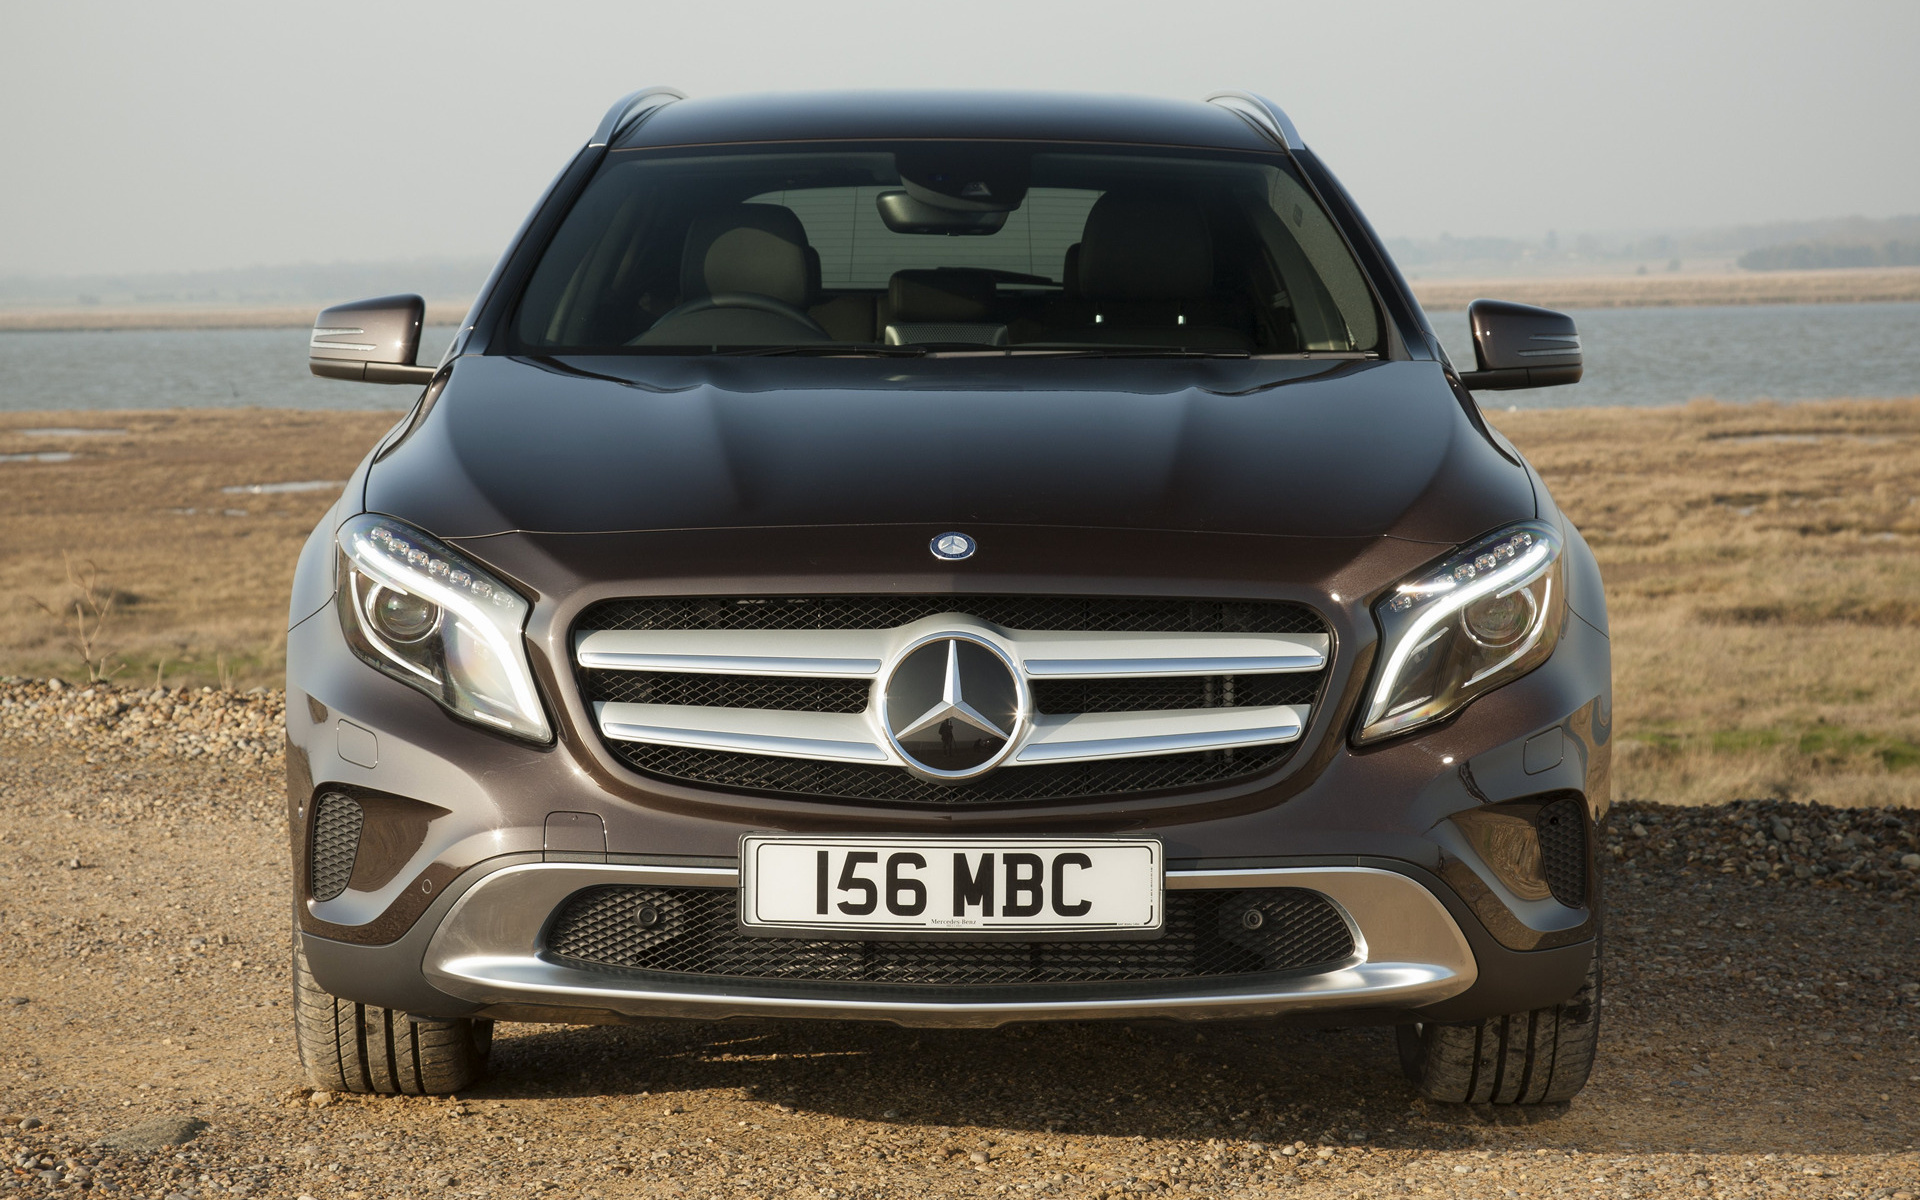 Mercedes-Benz GLA 200 CDI Sport (2014) UK Wallpapers and HD Images